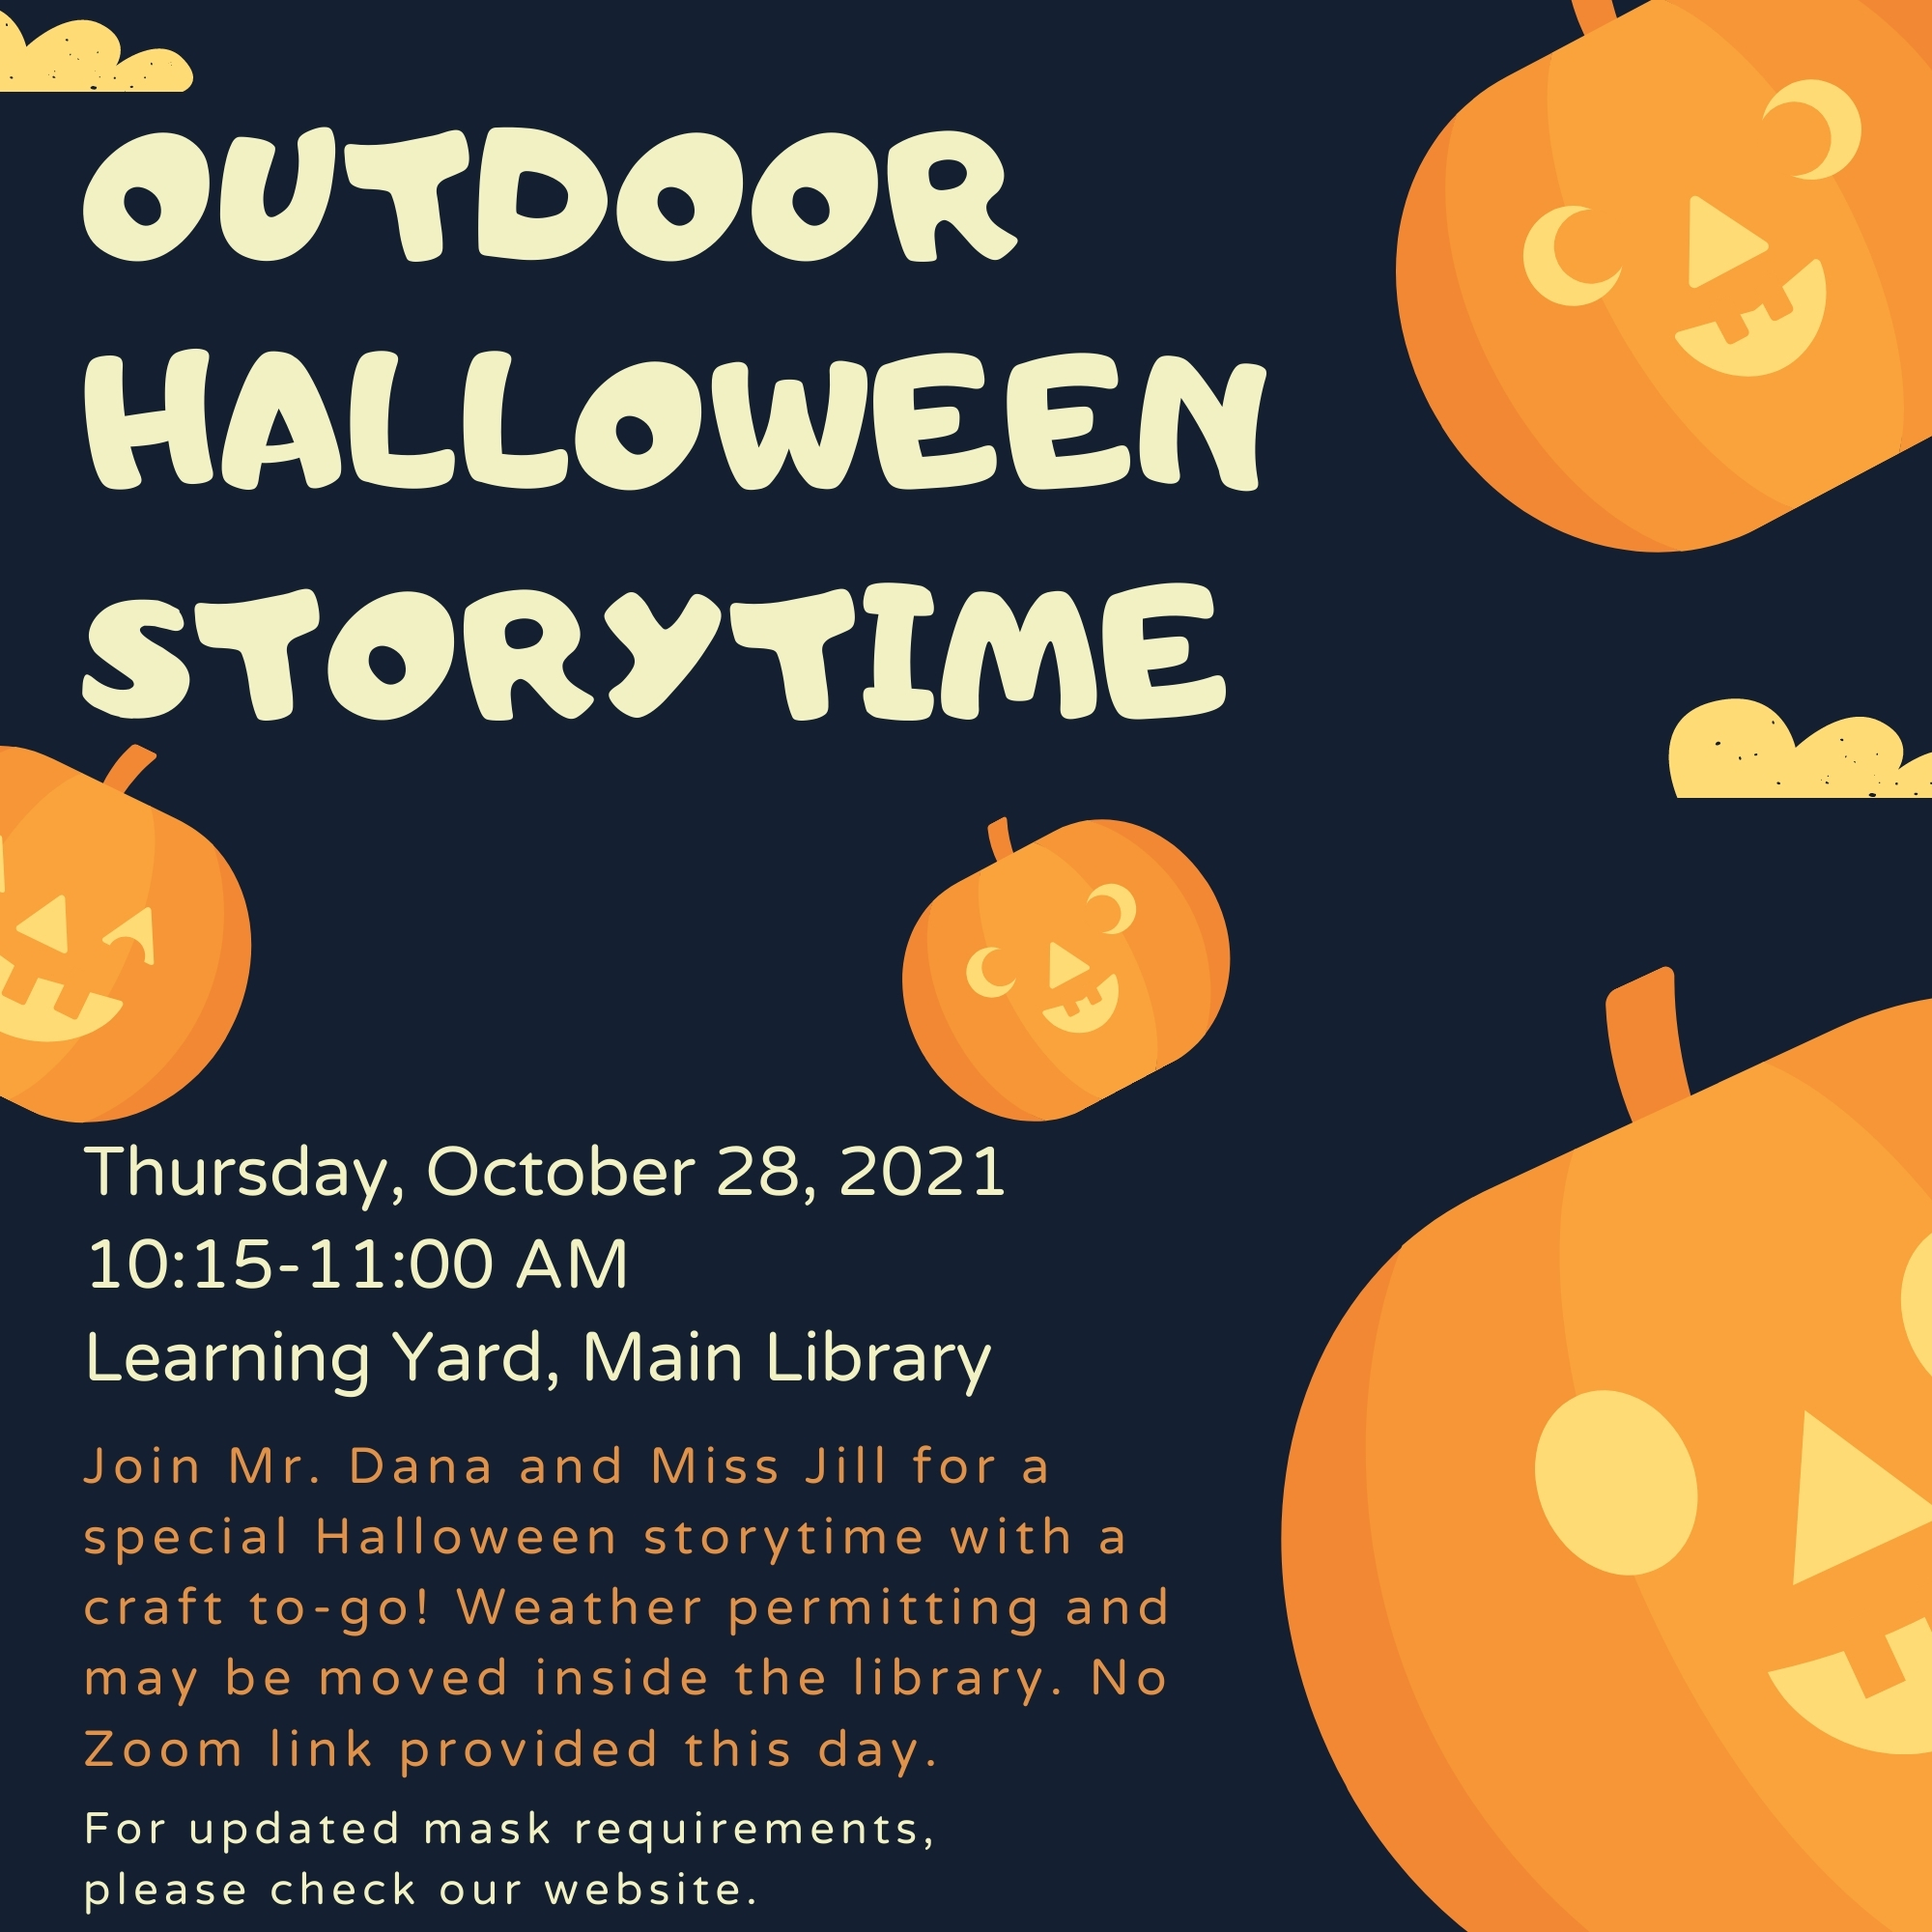 Outdoor Halloween Storytime with Mr. Dana and Miss Jill thumbnail Photo